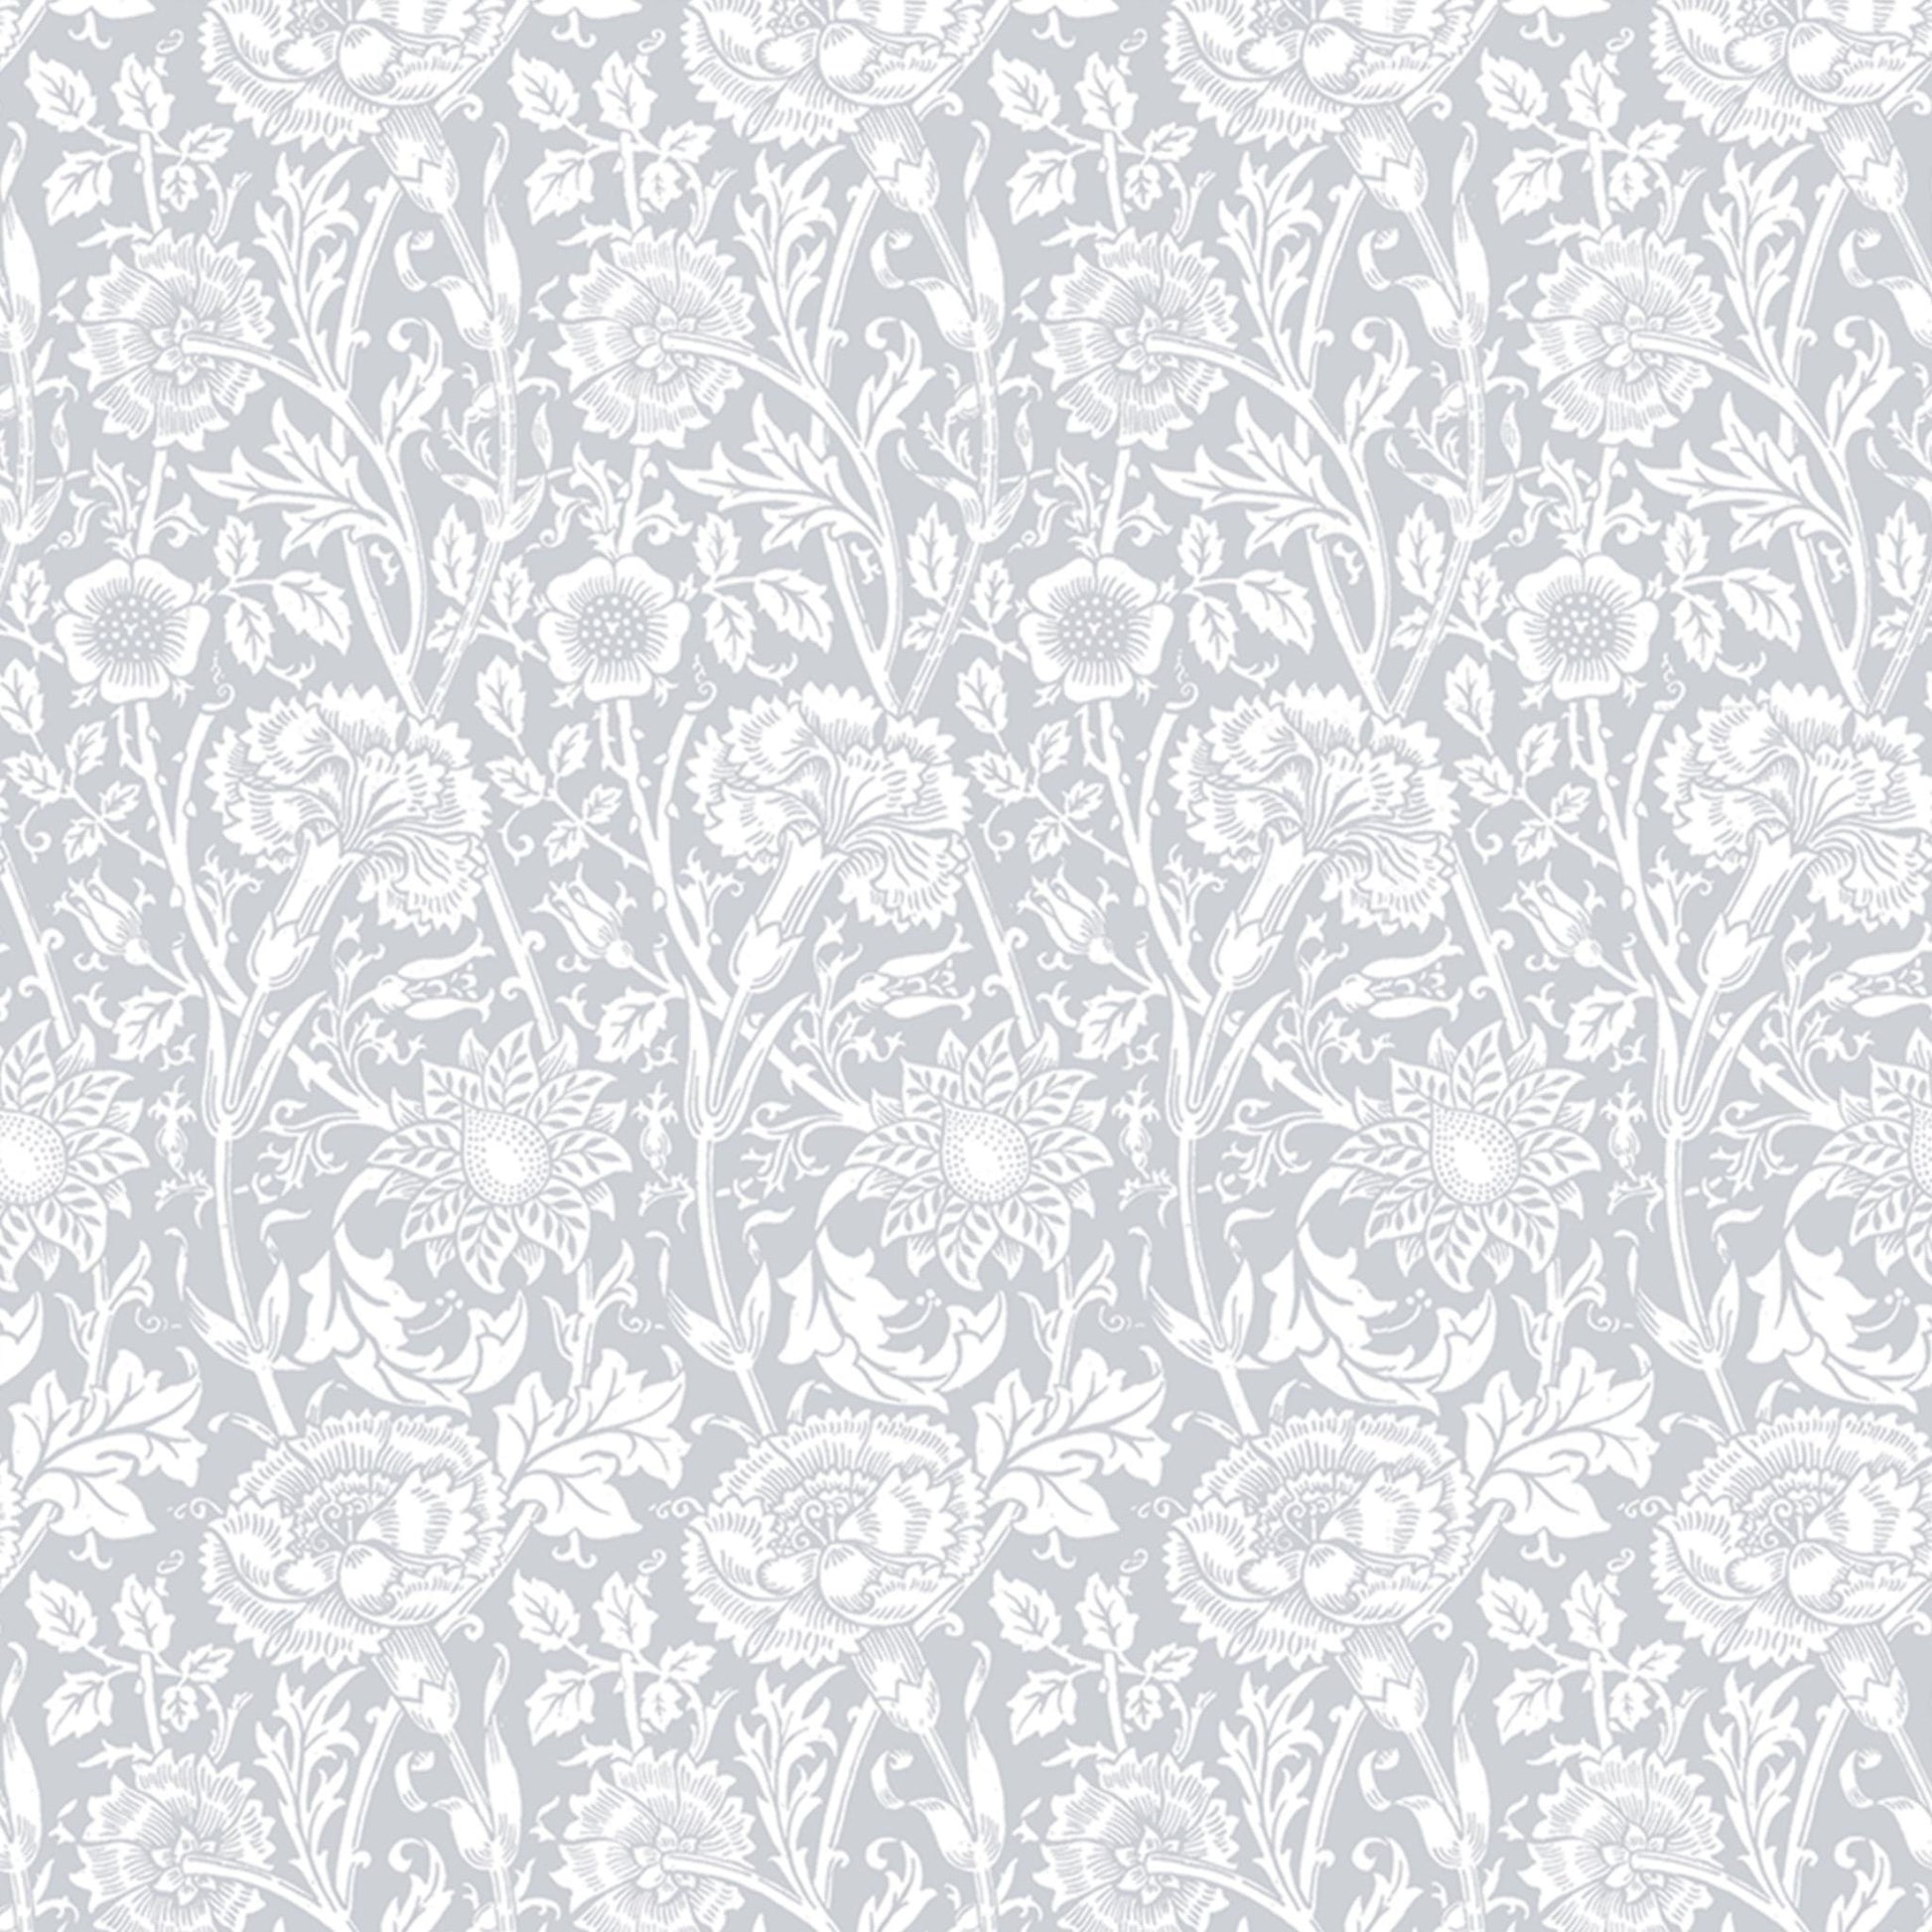 THE MASTER HERBALIST LILY OF THE VALLEY fragrance SCENTED Drawer Liners in GREY William Morris Design. Made in Britain.